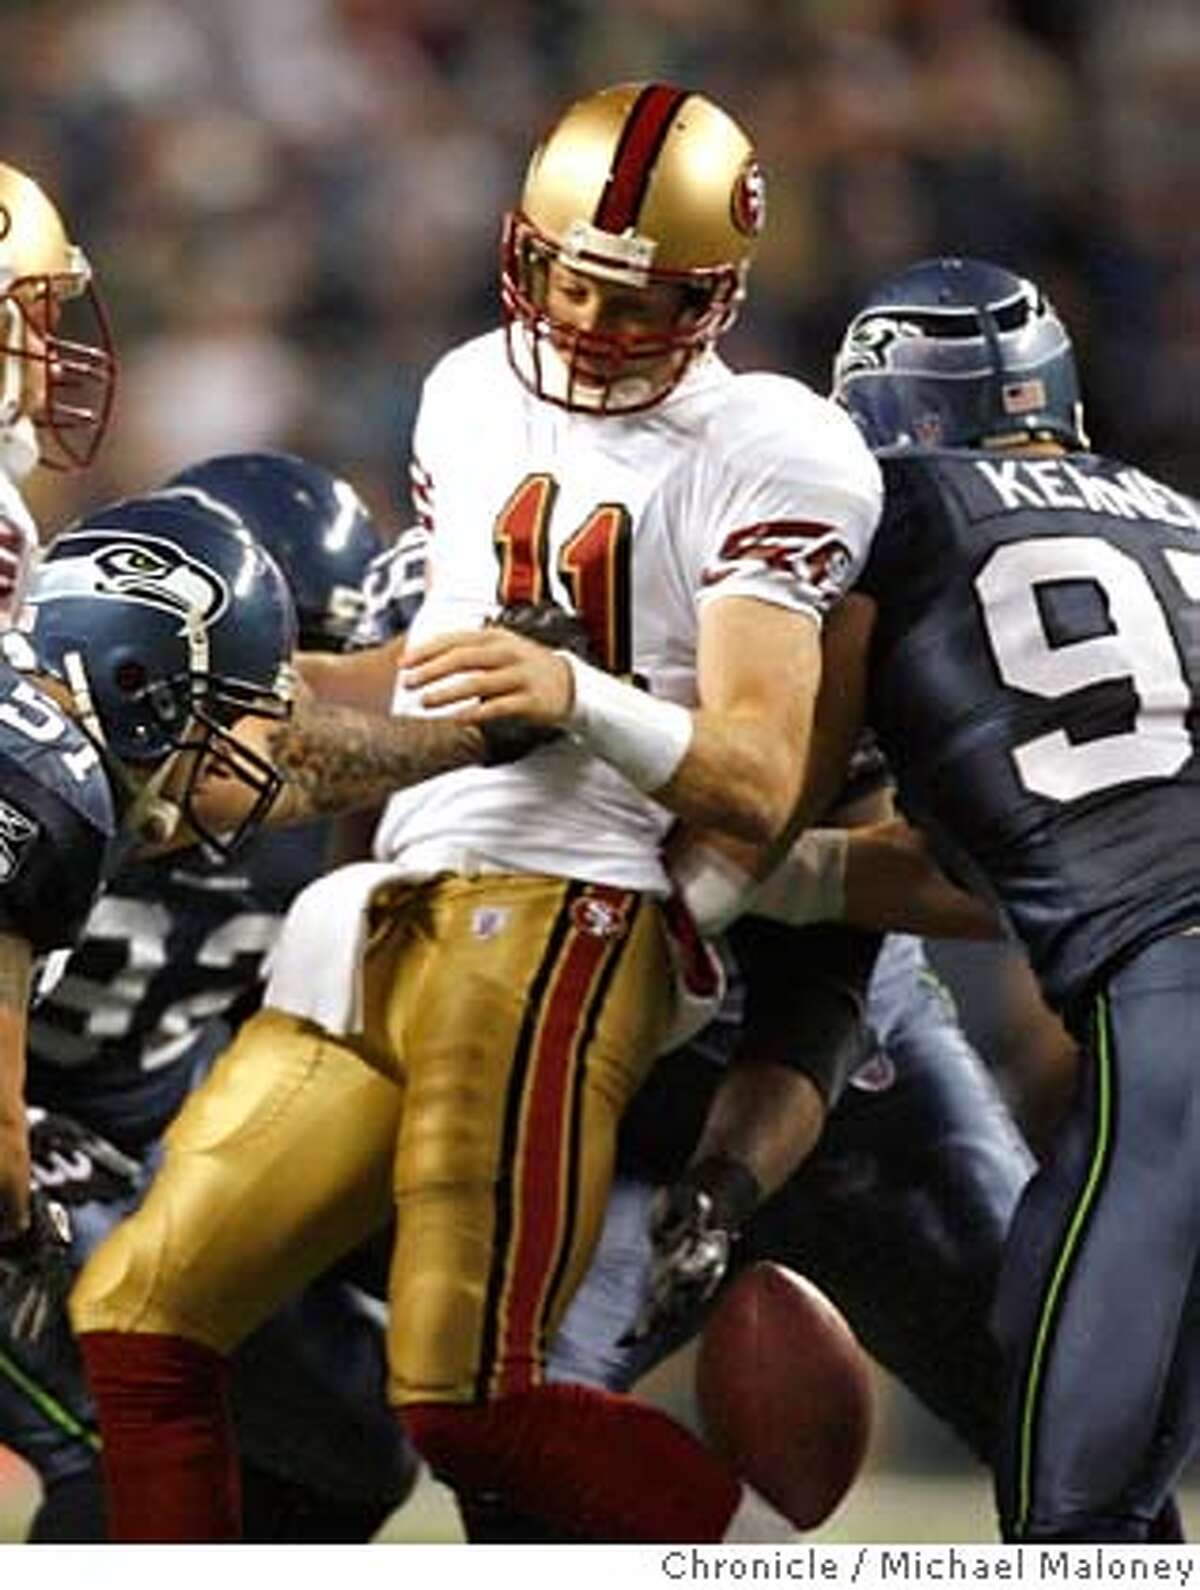 San Francisco 49ers quarterback Alex Smith (11) is sacked and loses the ball in the 1st quarter. Seattle recovered. The Seattle Seahawks host the San Francisco 49ers in a Monday night football game at Qwest Fleld in Seattle. Photo taken on 11/12/07, in Seattle, WA. Photo by Michael Maloney / San Francisco Chronicle ***Code replacement/roster MANDATORY CREDIT FOR PHOTOG AND SF CHRONICLE/NO SALES-MAGS OUT